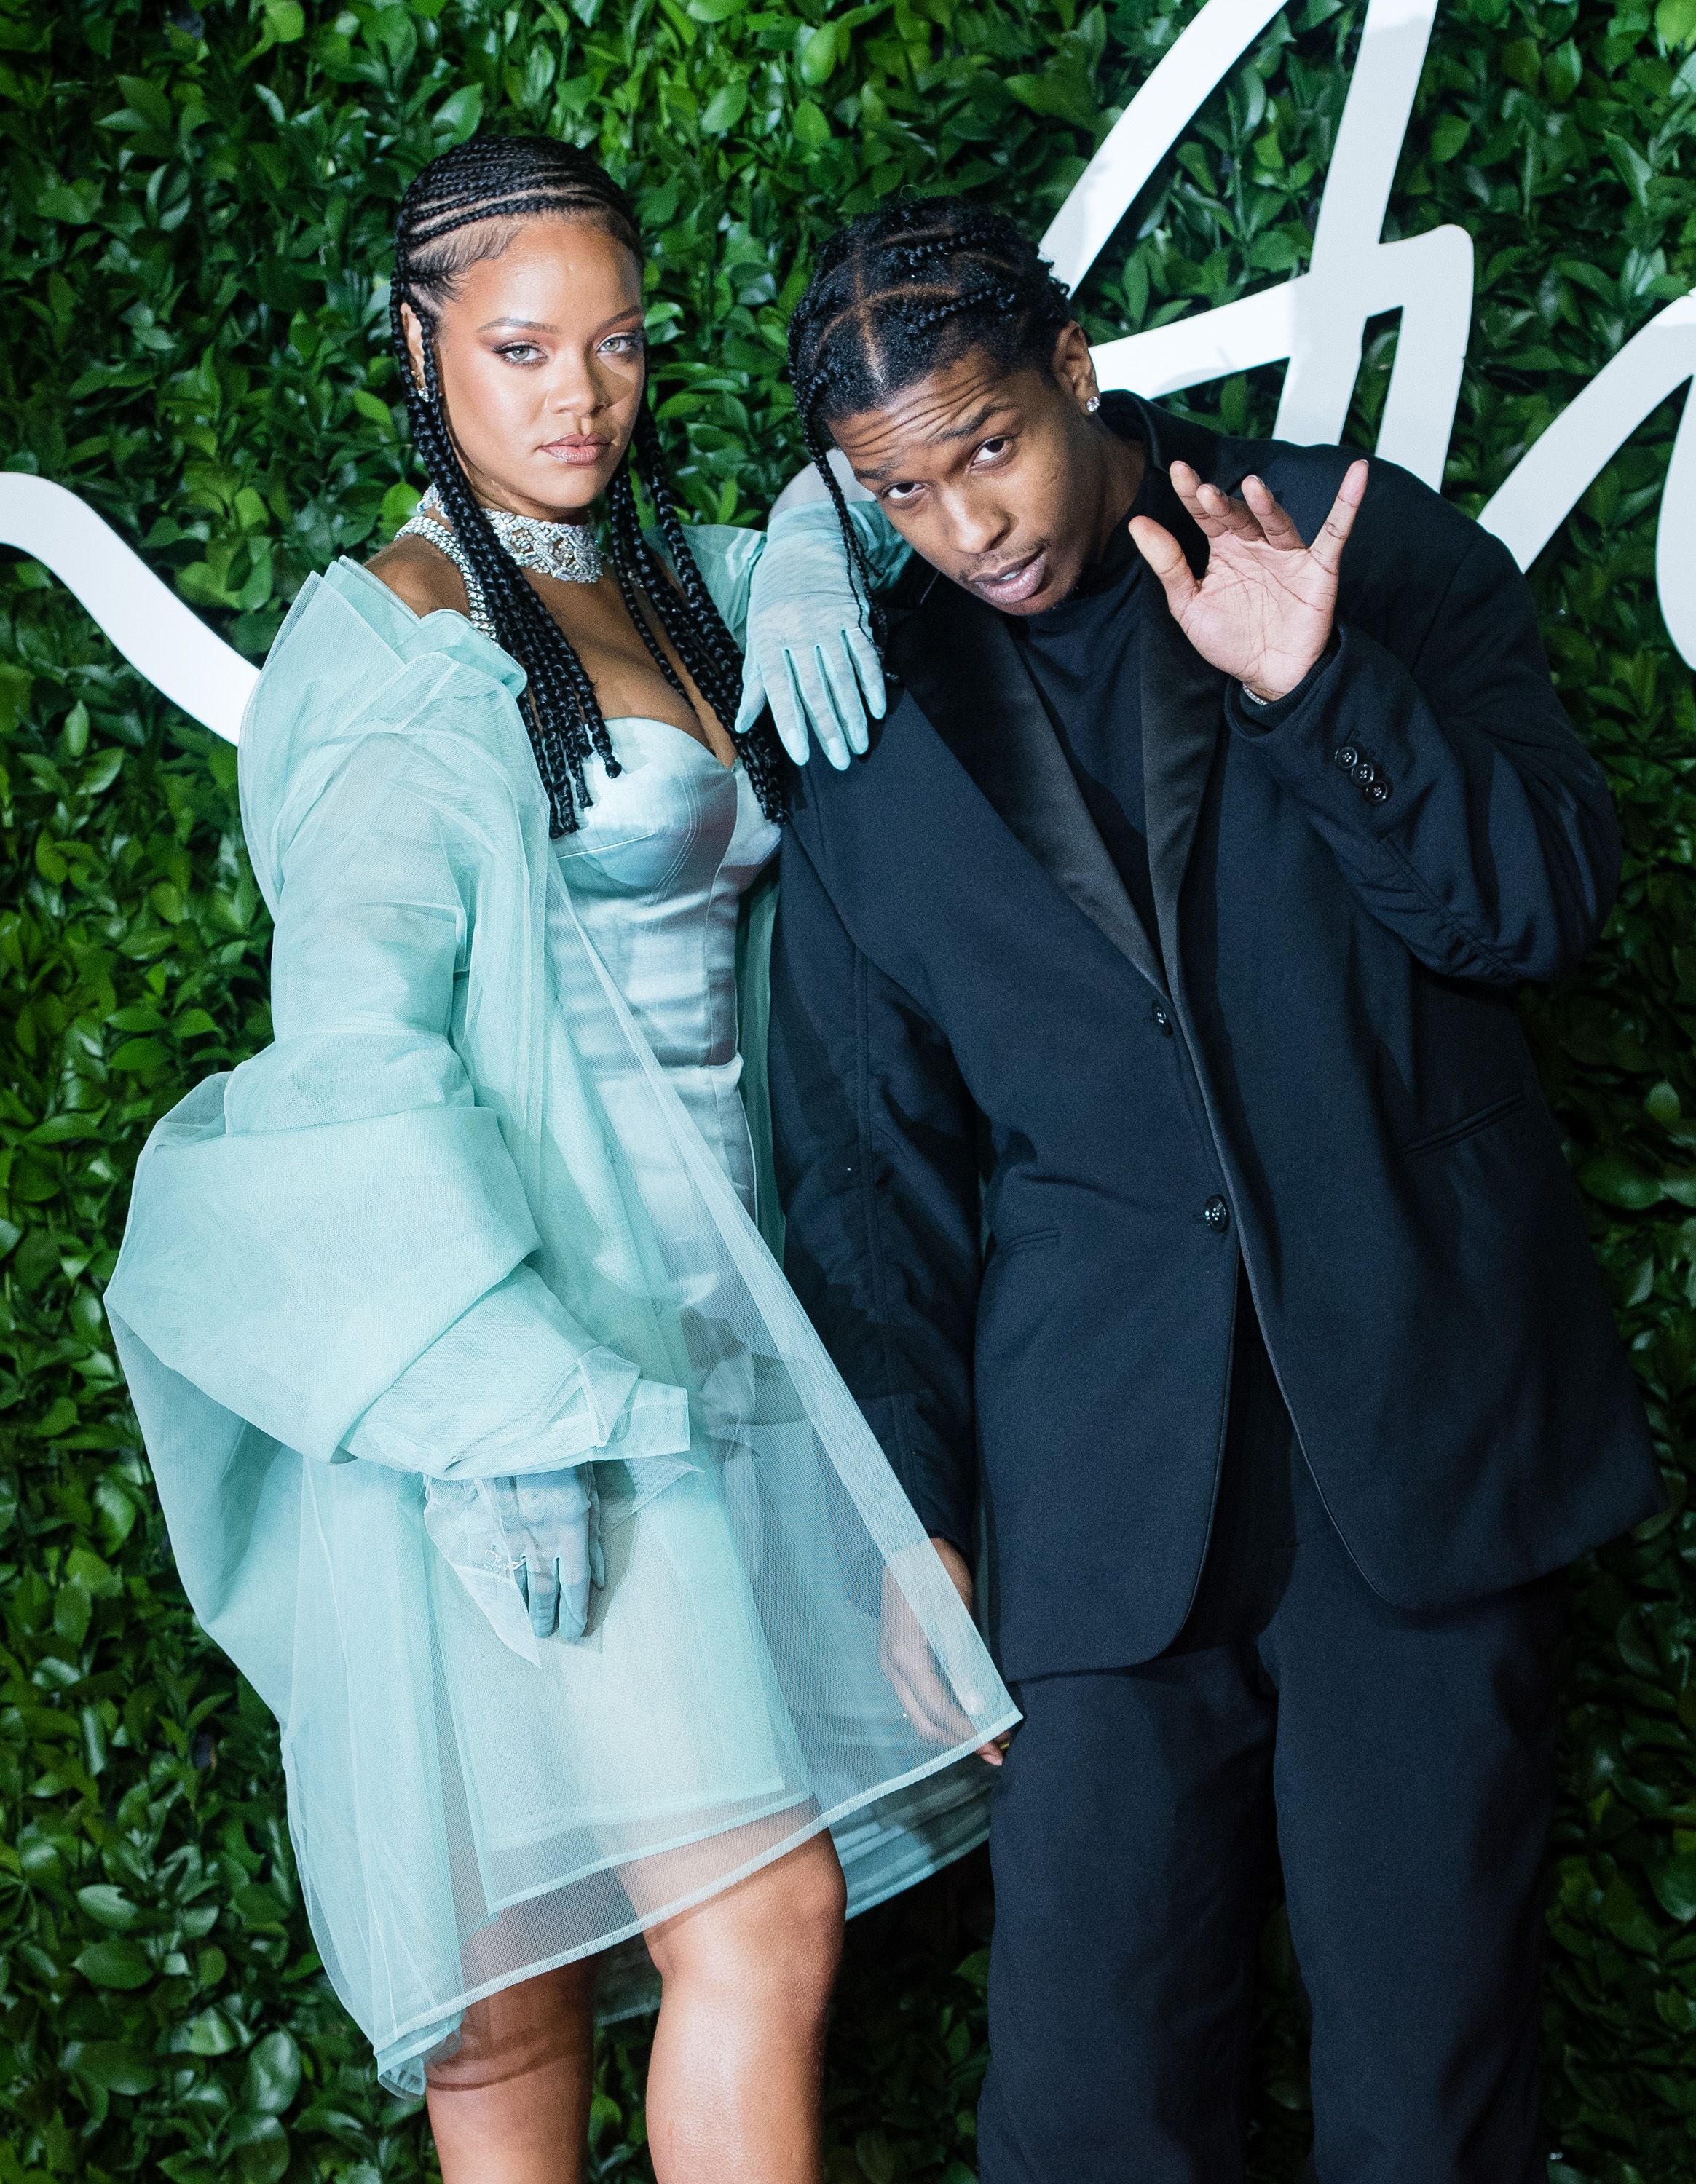 Rihanna and ASAP Rocky: A Complete Timeline of Their Relationship